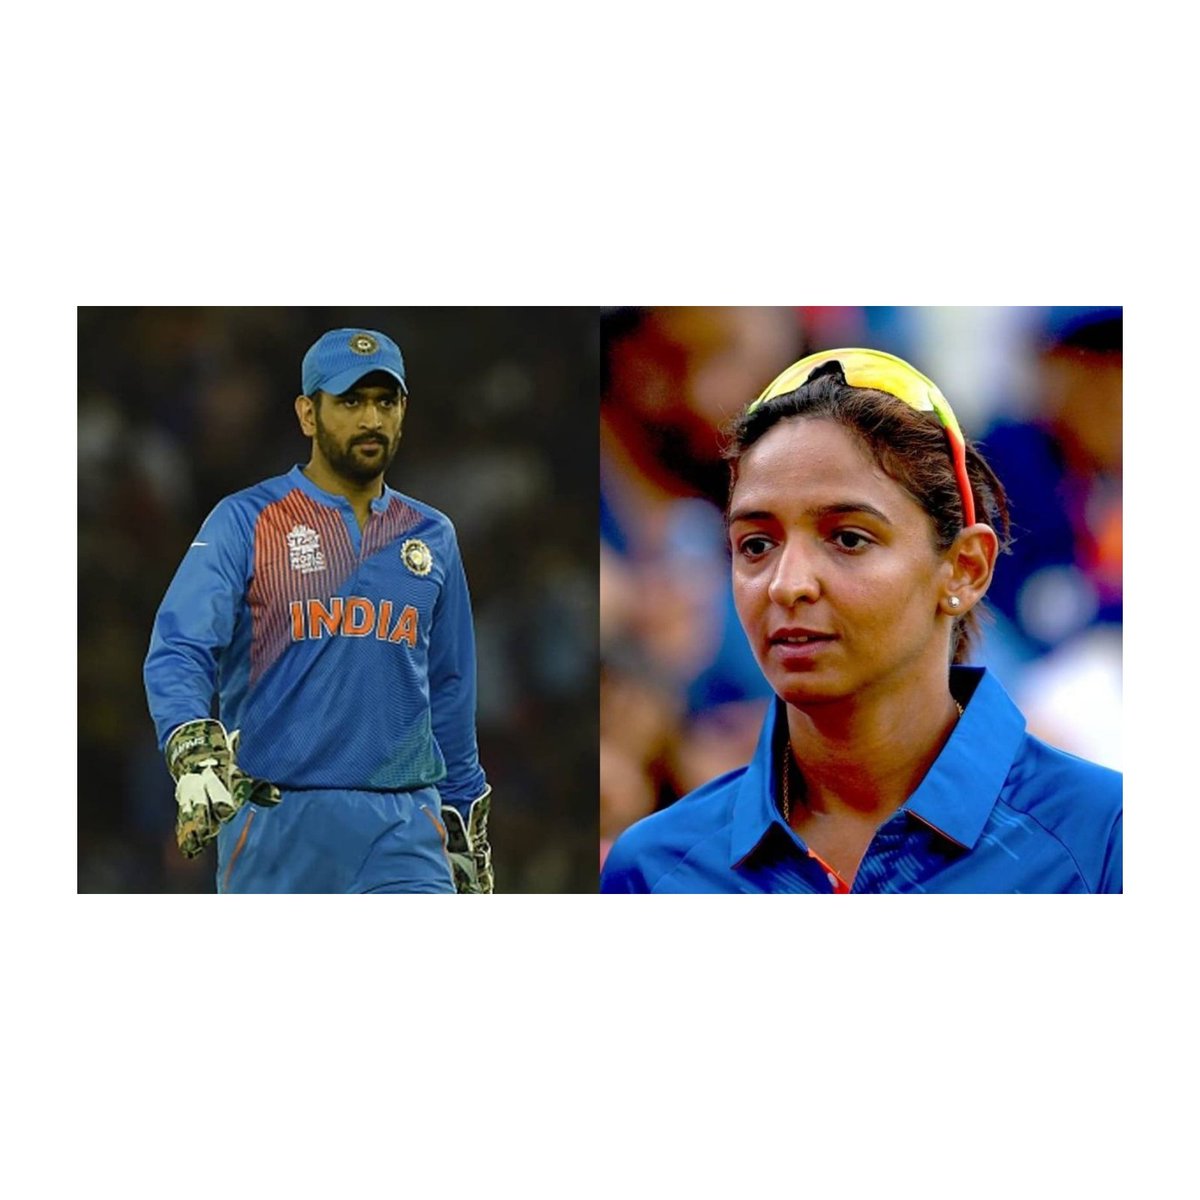 • MS Dhoni Is The First Captain To Have Won 3 Consecutive Matches In IPL. 

• Harmanpreet Kaur Becomes First Captain To Have Won 3 Consecutive Matches In WPL.

#MSDhoni𓃵 #HarmanpreetKaur #WPL2023 #IPL2022